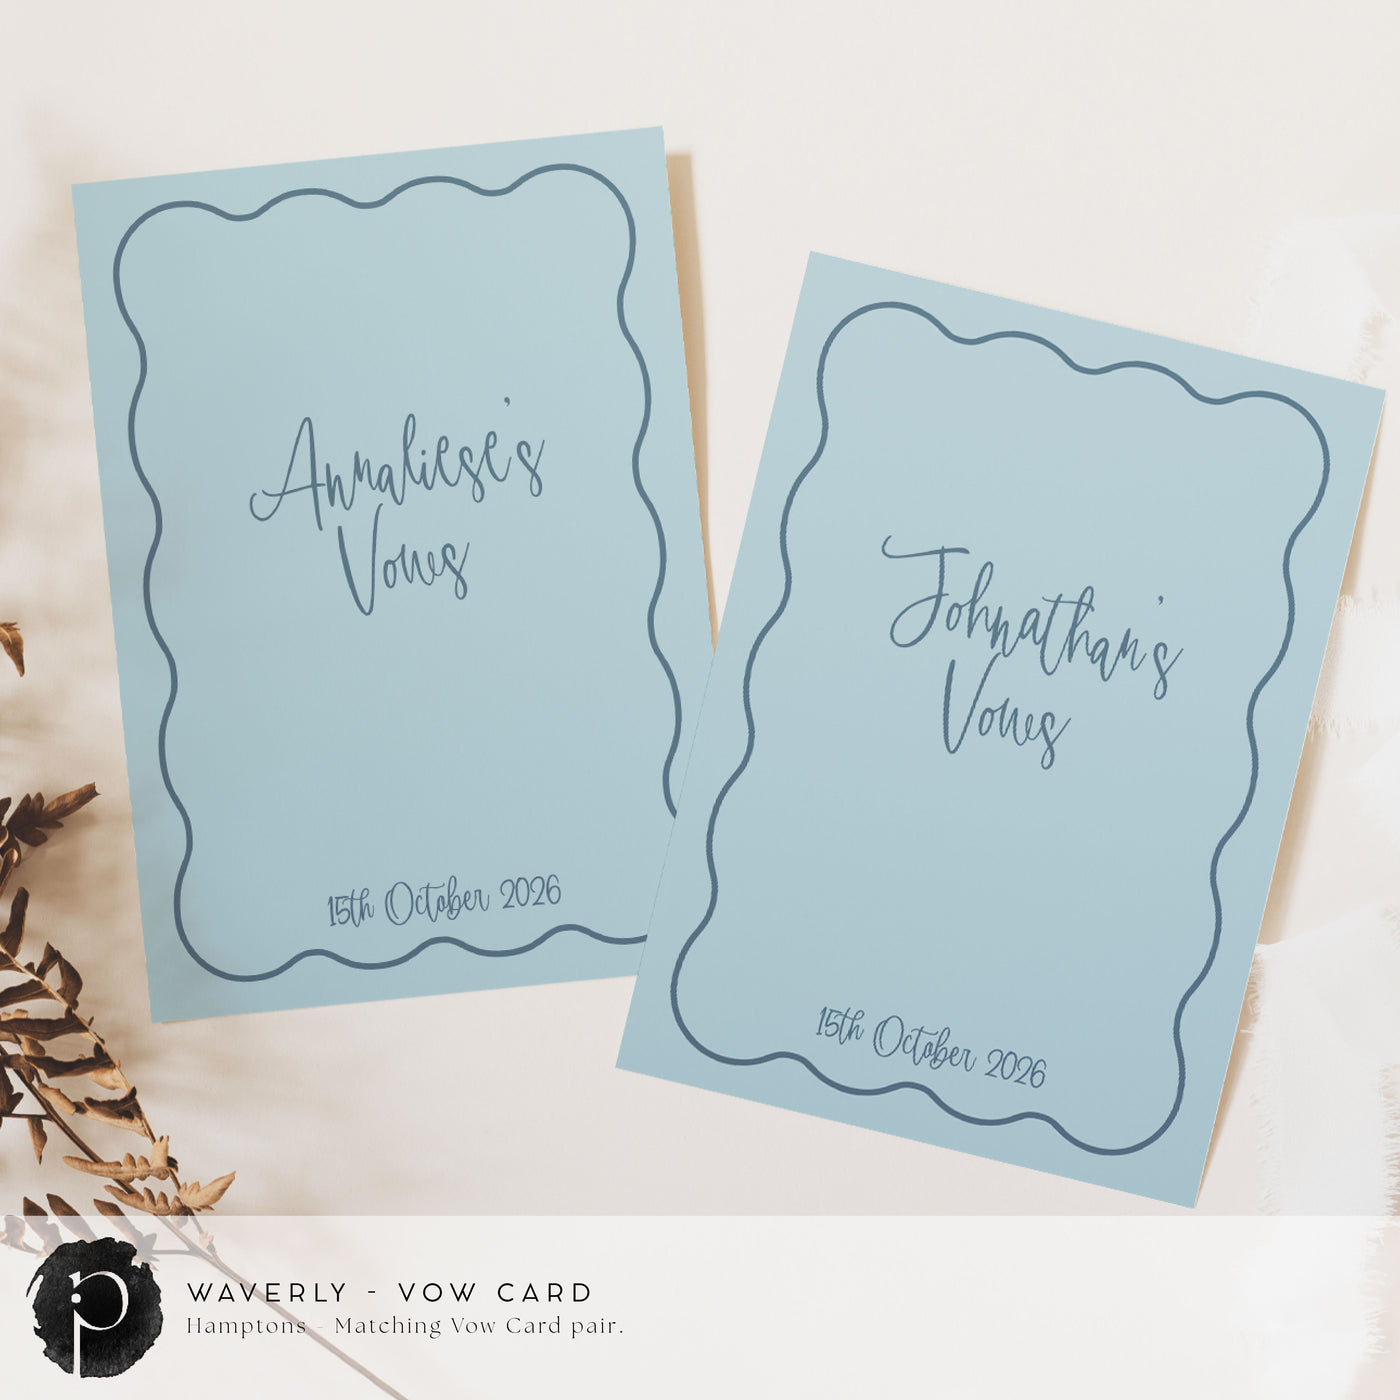 A pair of vow cards to write your wedding vows on in a modern retro wedding theme with ocean blue writing on duck egg blue or dusty blue background